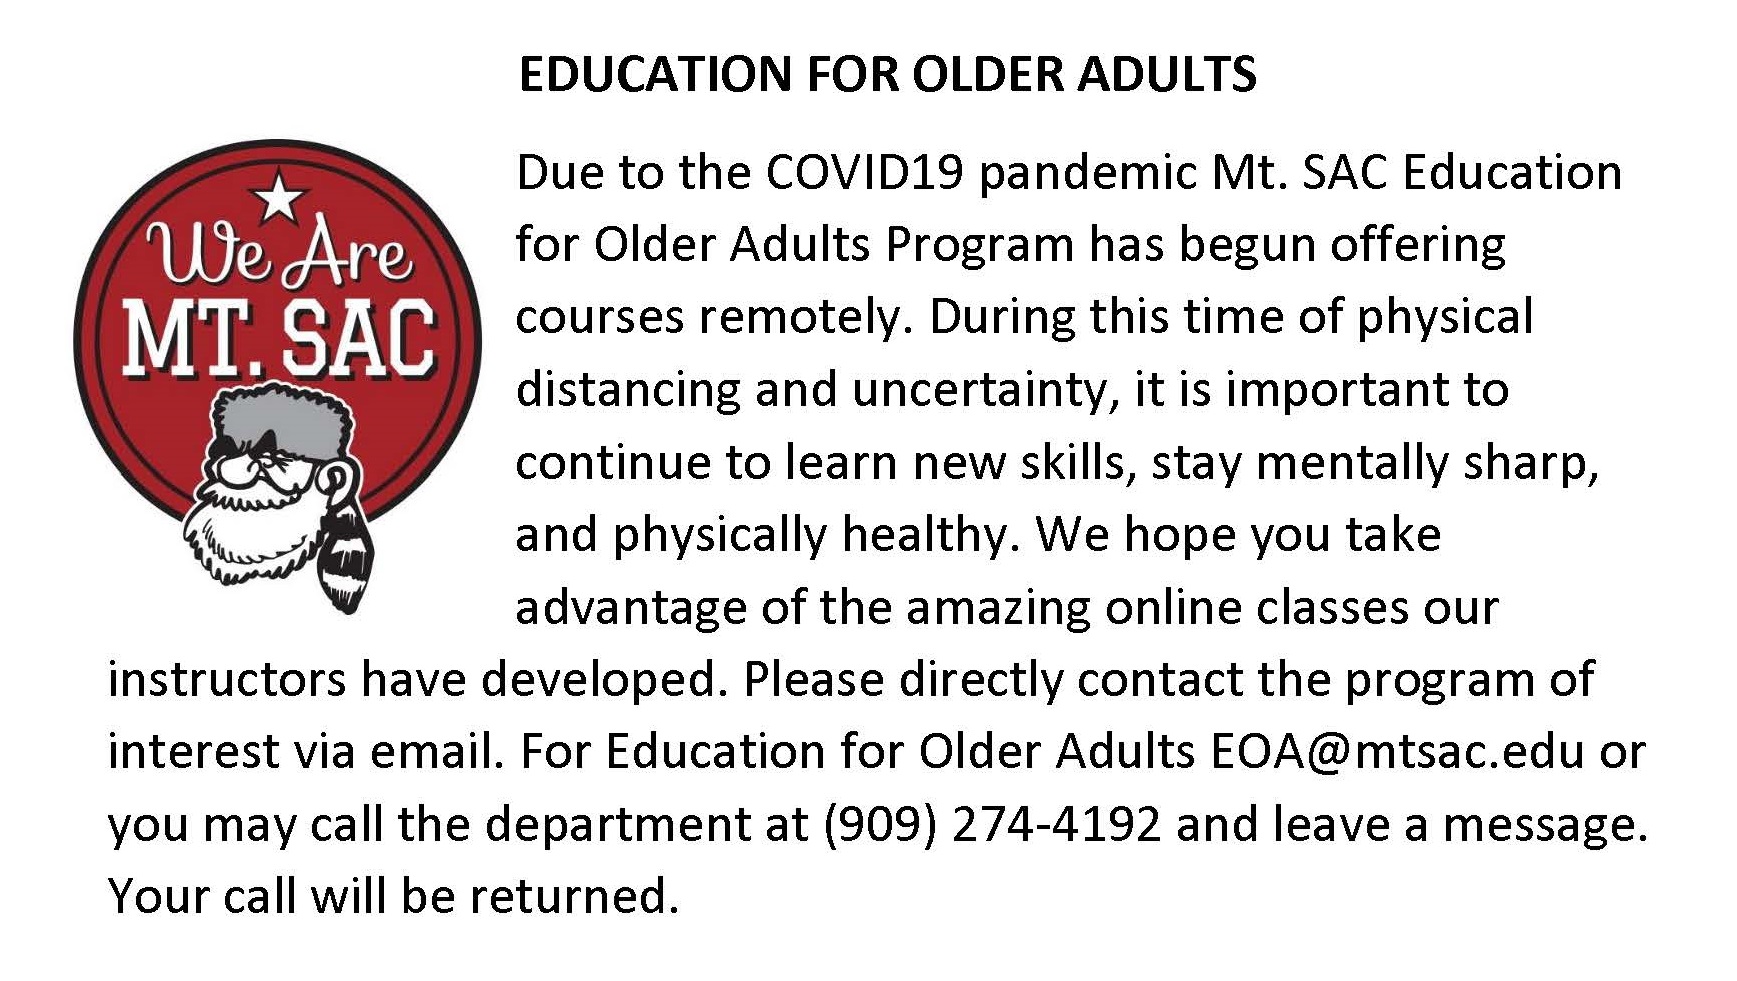 Mt. SAC Education for Older Adults Classes online